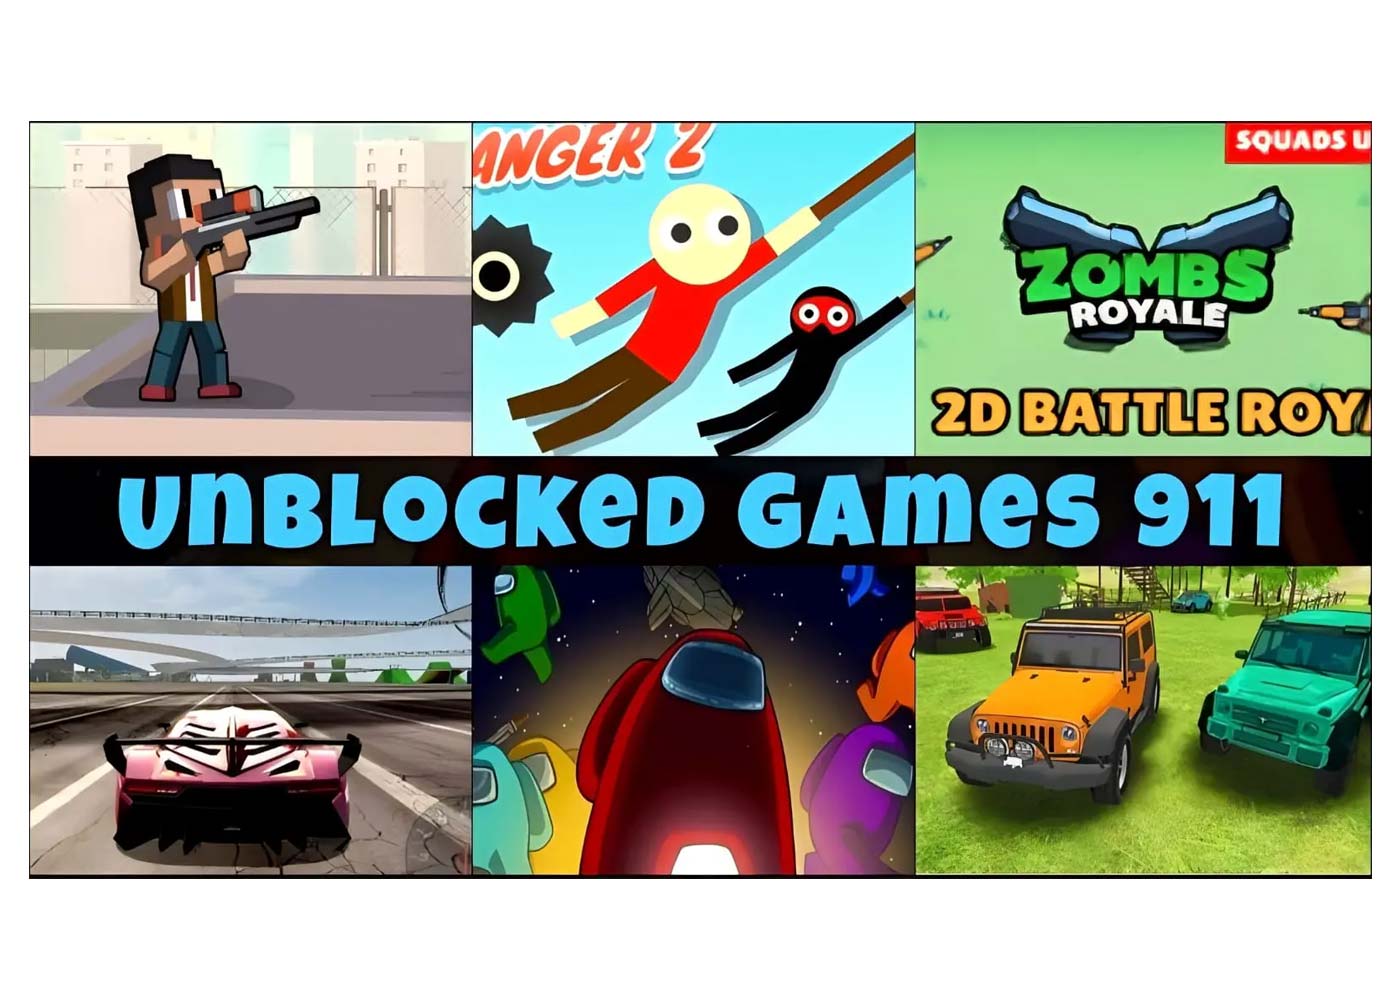 Everything you need to know about Unblocked Games 911